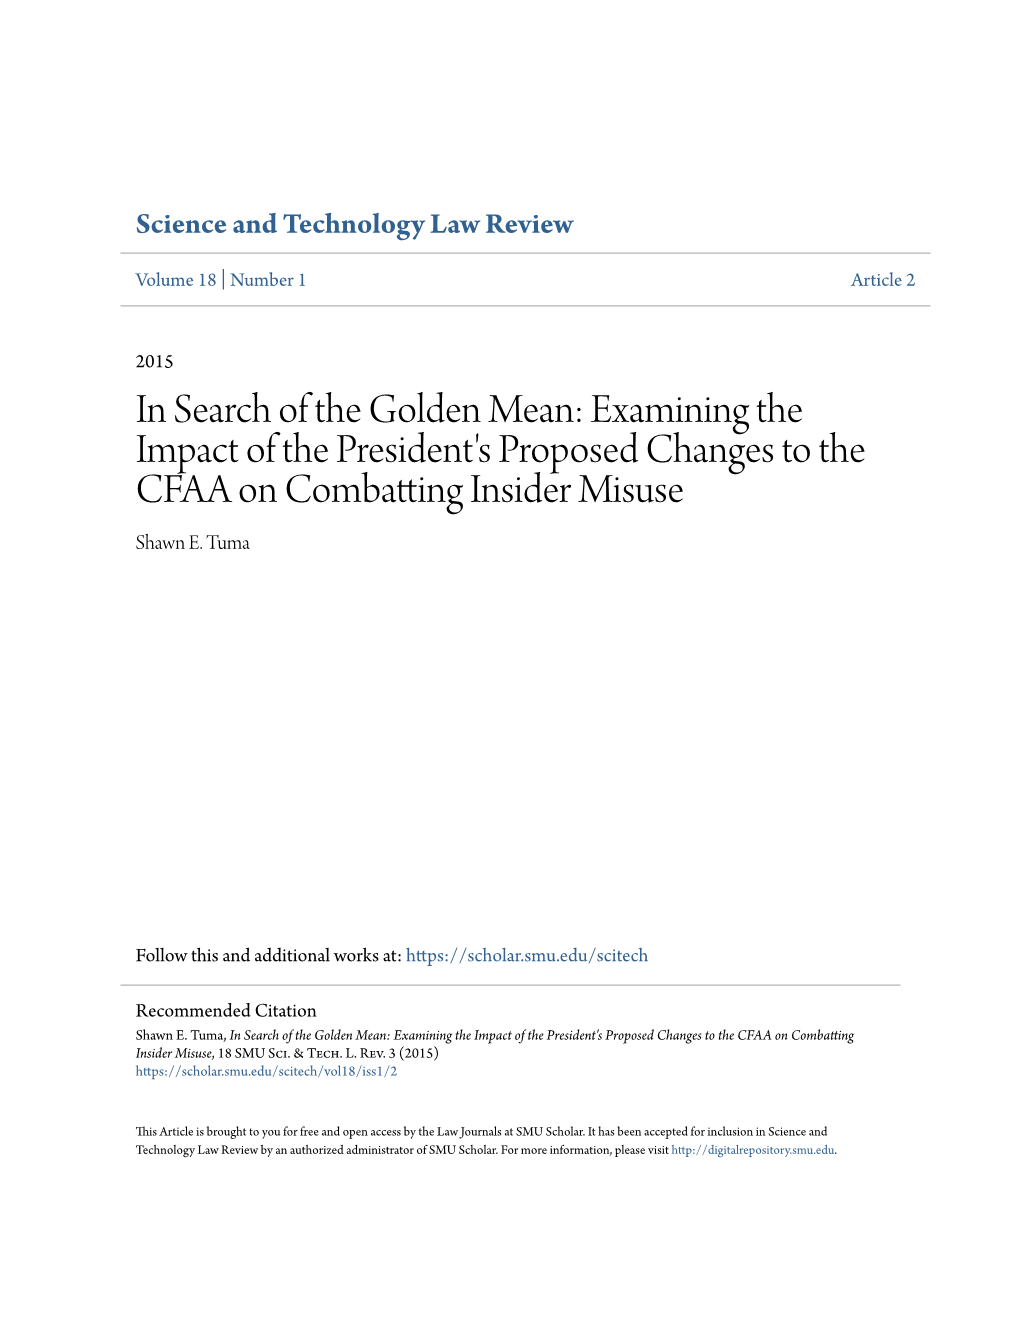 In Search of the Golden Mean: Examining the Impact of the President's Proposed Changes to the CFAA on Combatting Insider Misuse Shawn E